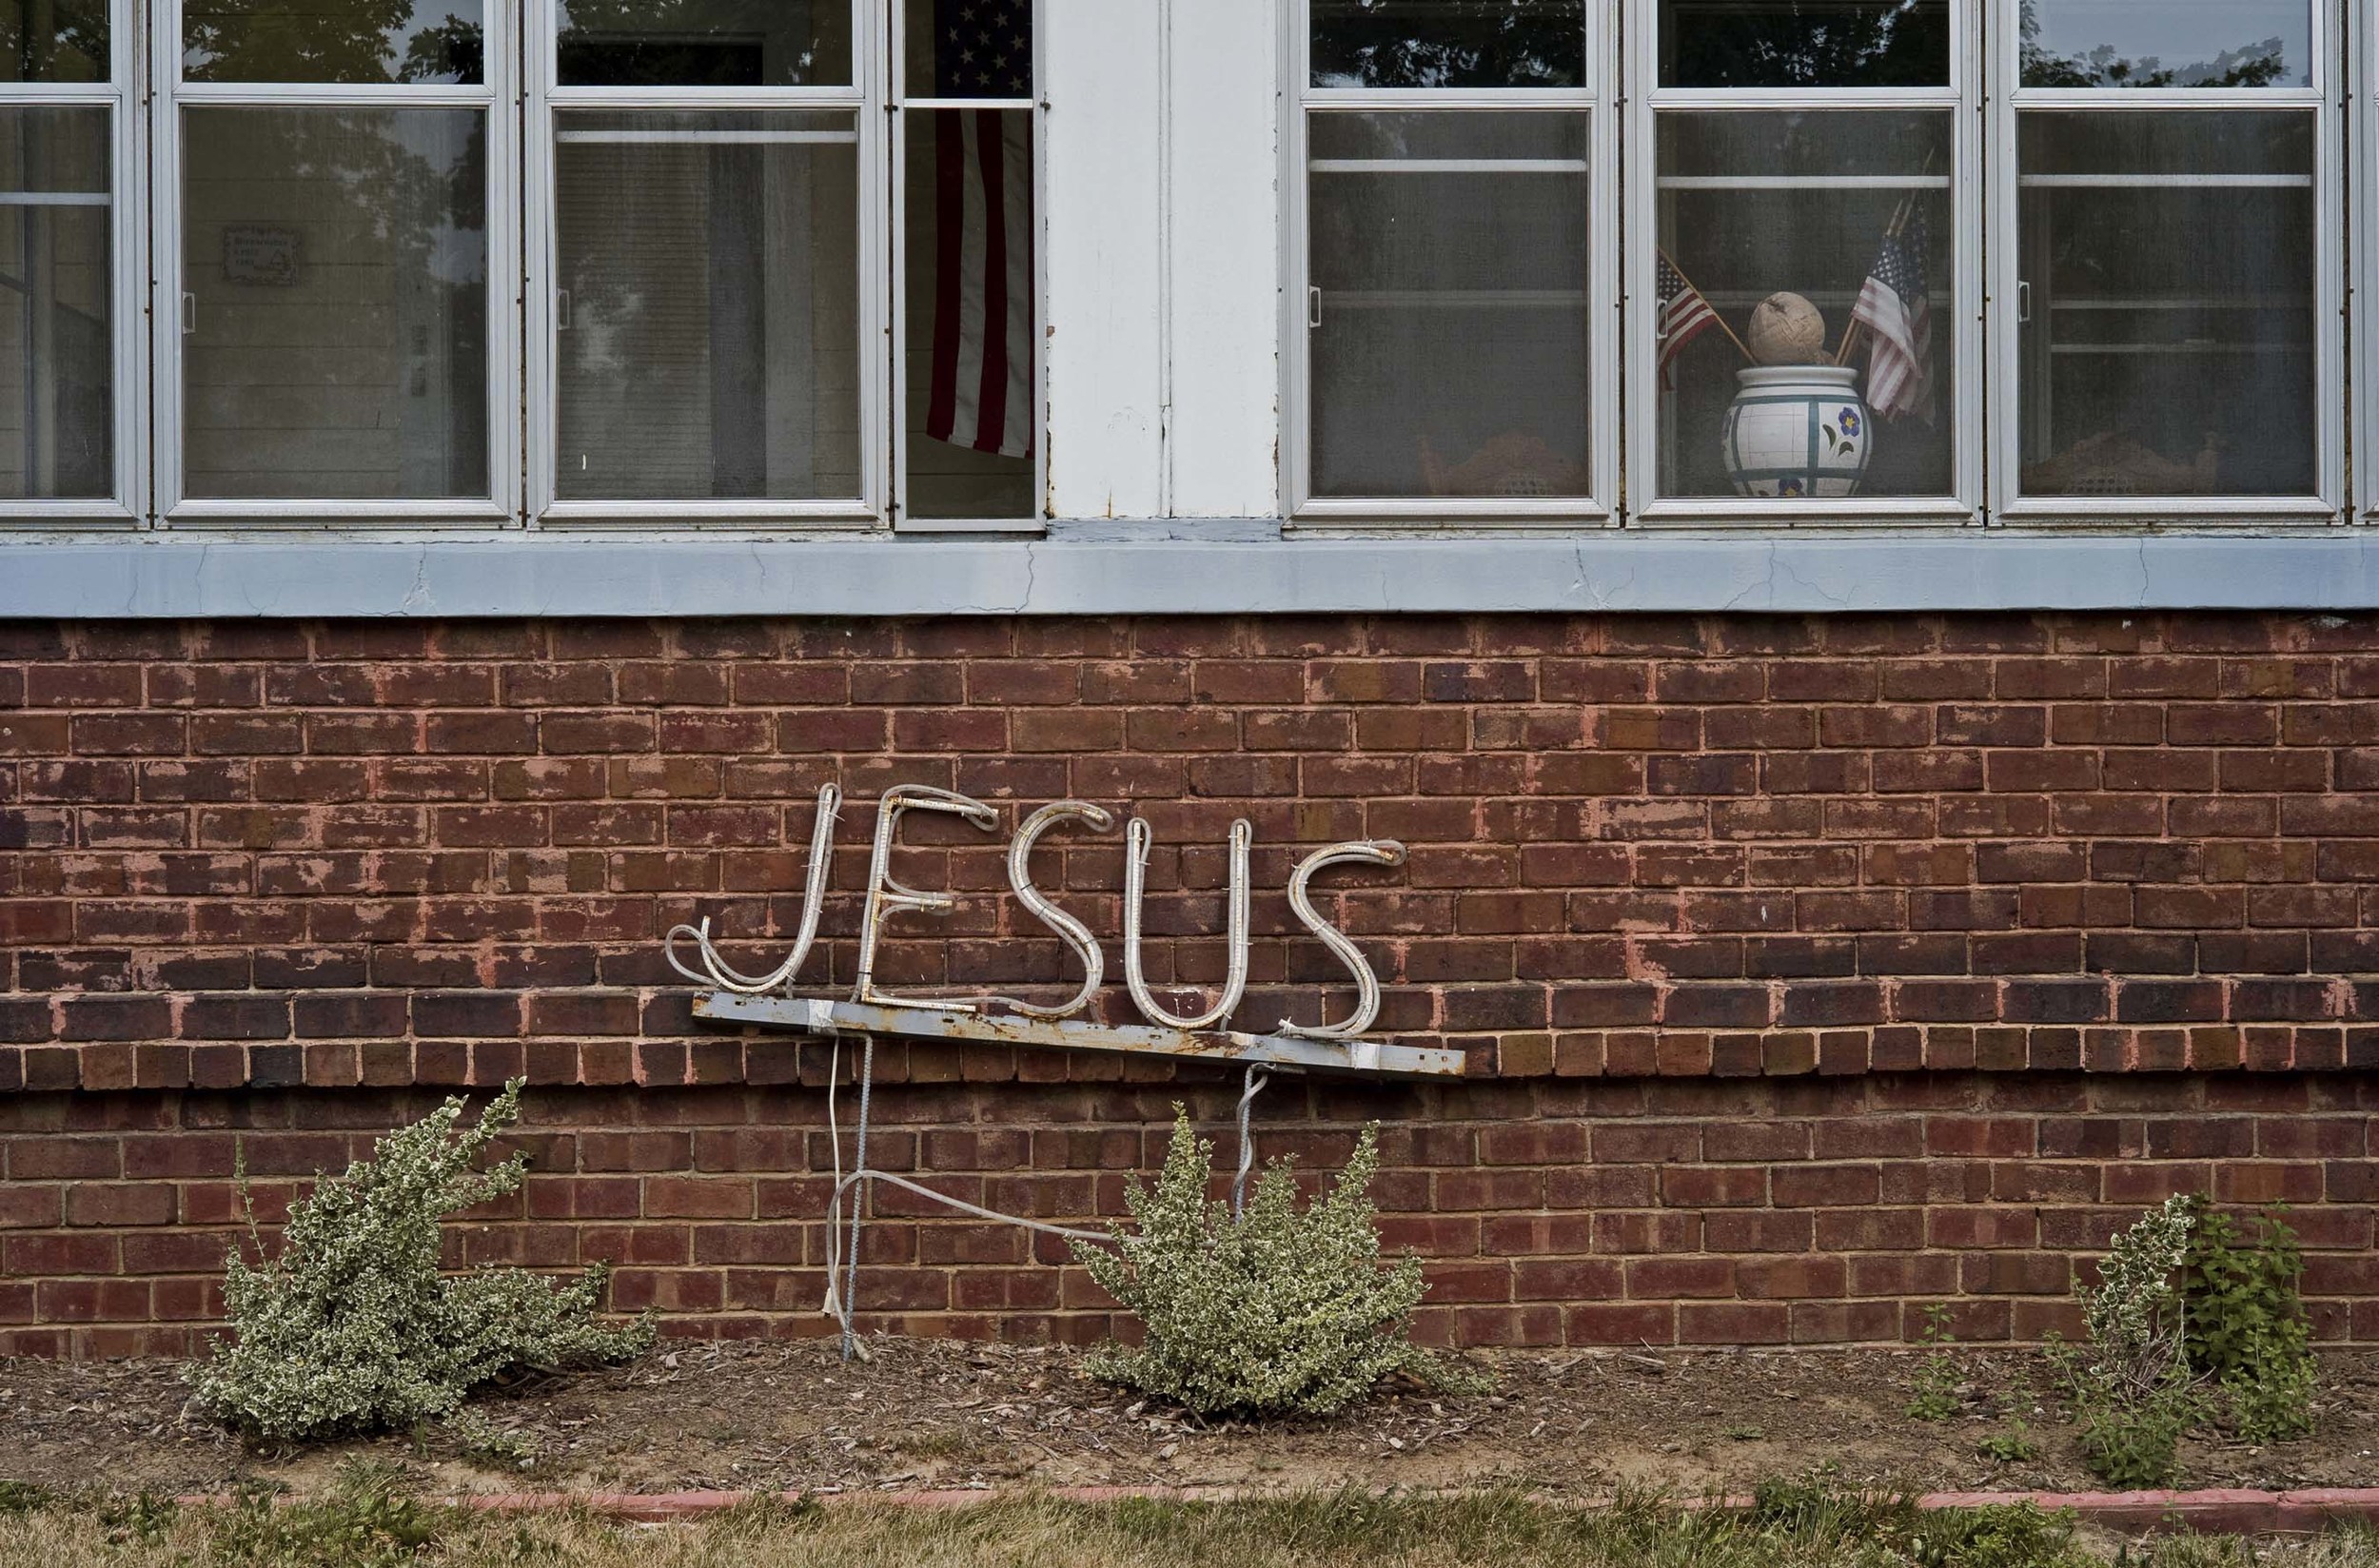  House with Jesus sign. Rushville, IL. June, 2012  